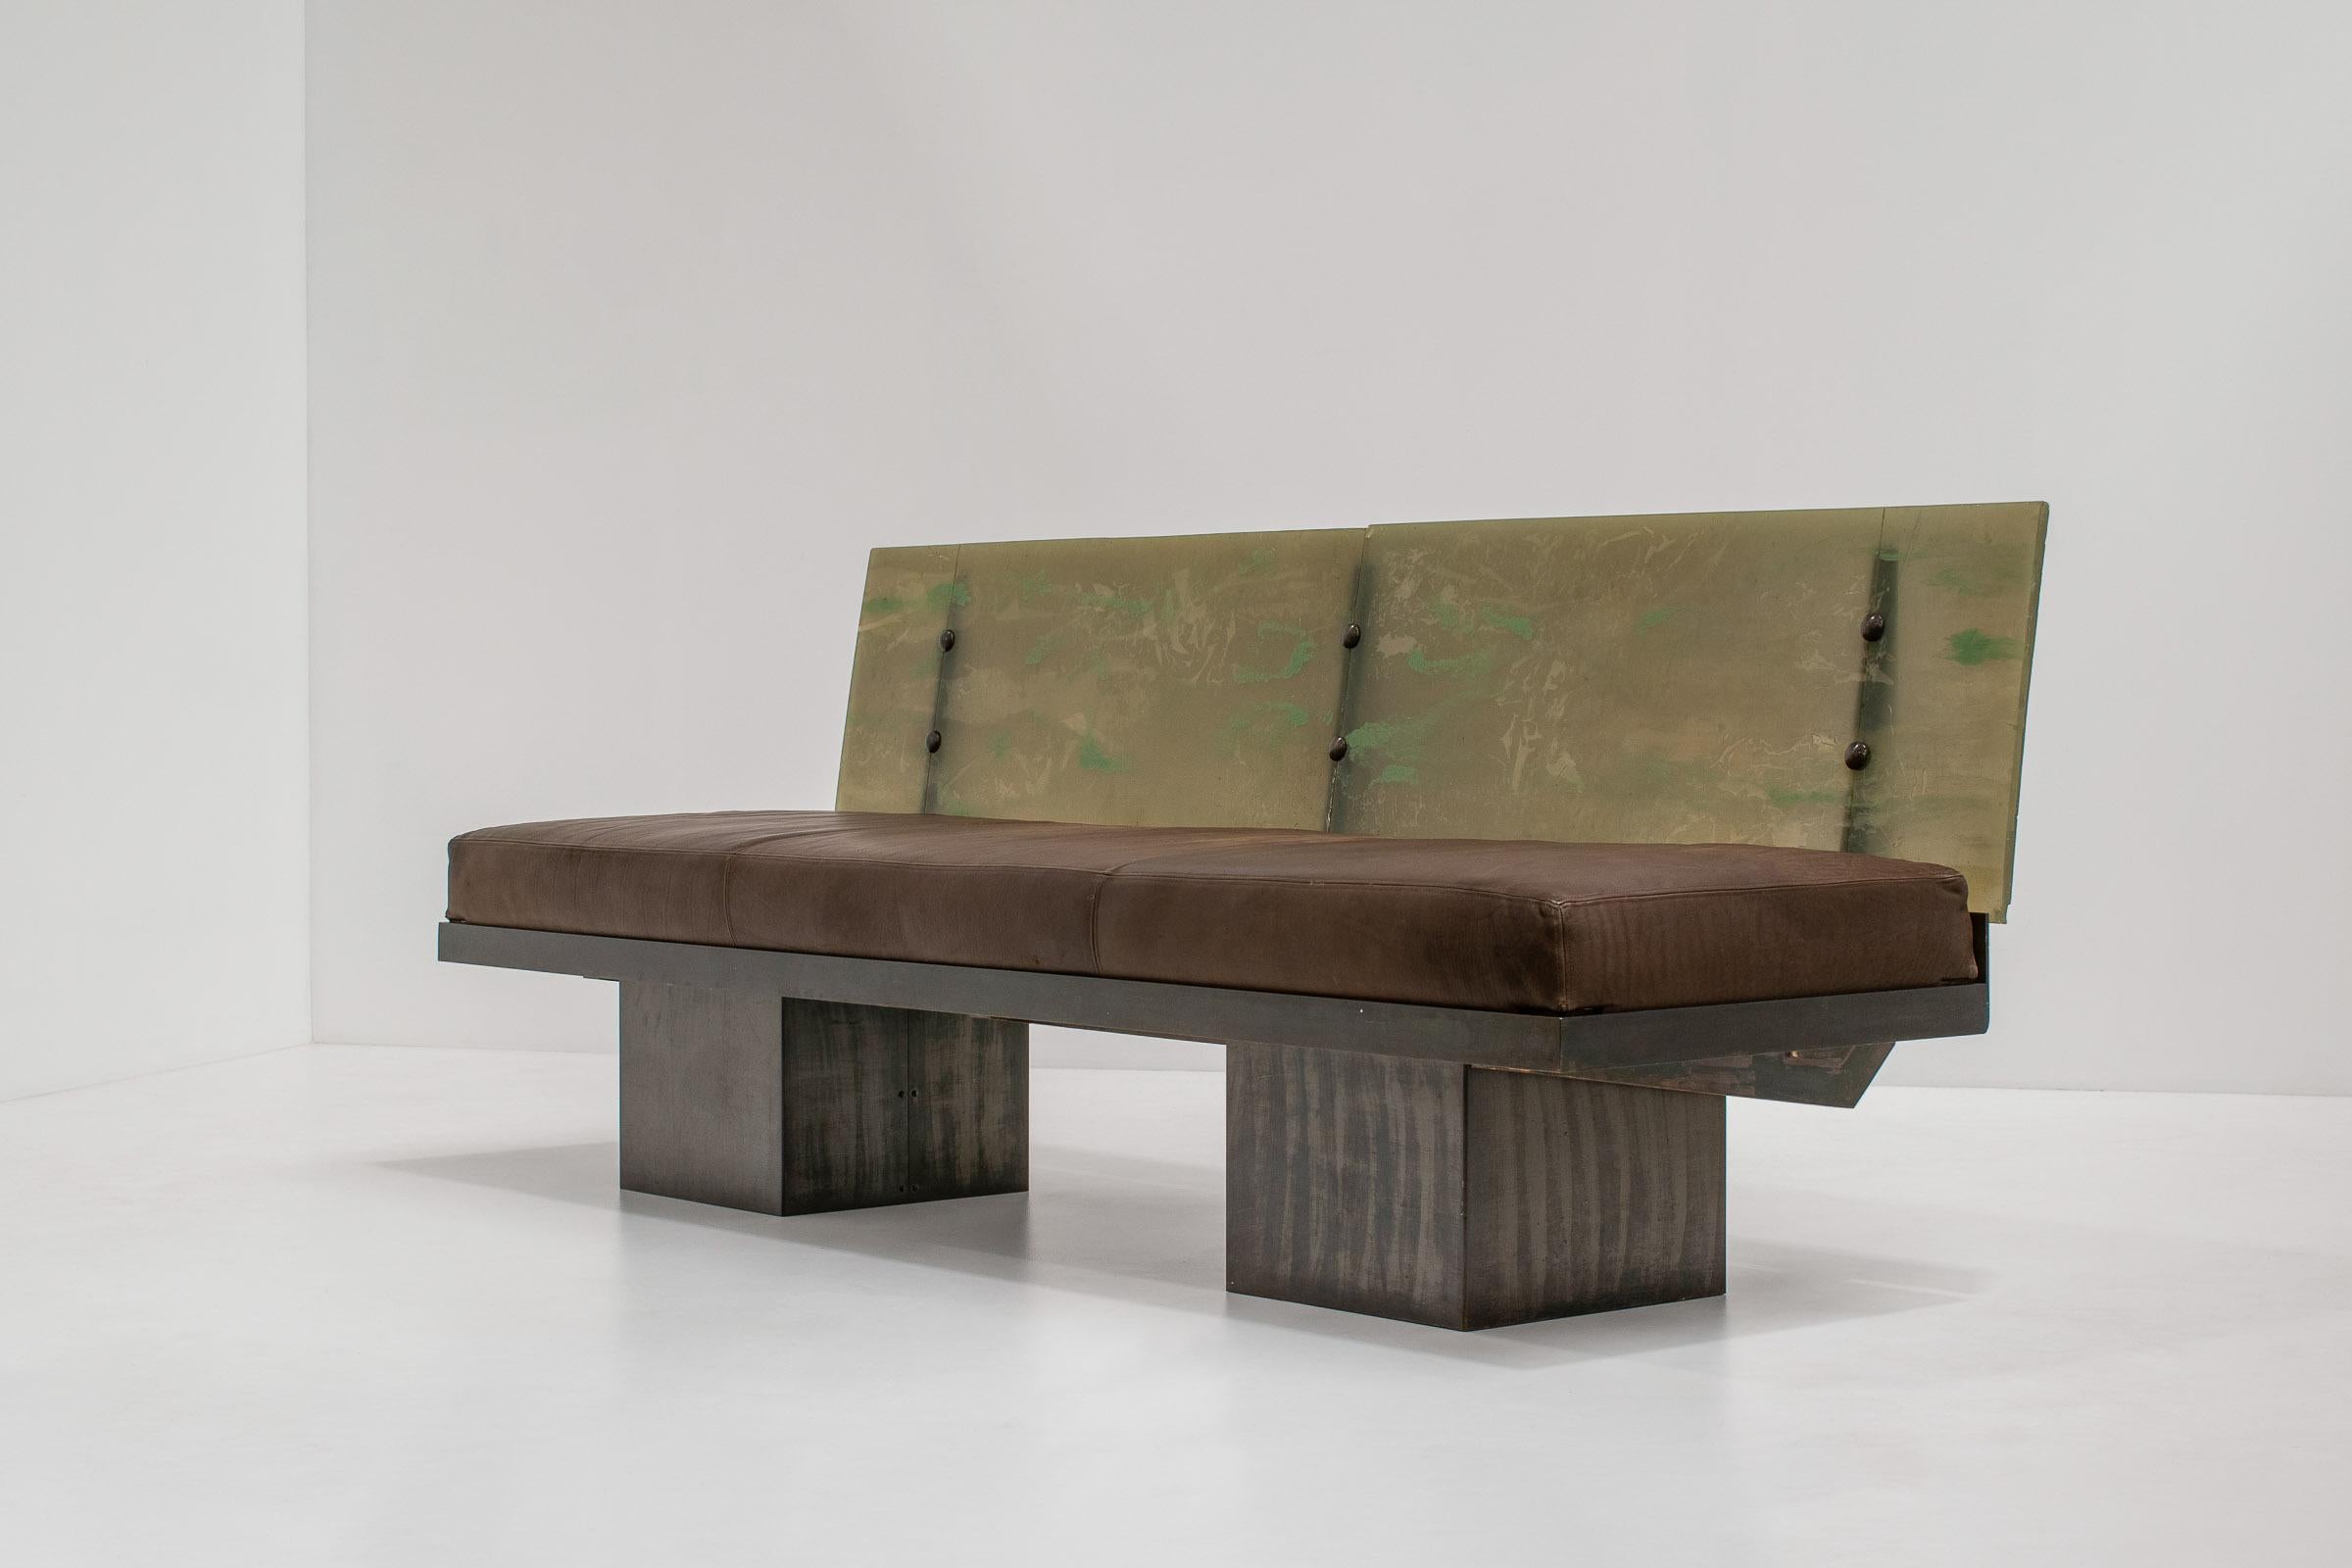 Sculptural Post-Modern Steel Sofa, France 1980s In Good Condition For Sale In Antwerp, BE